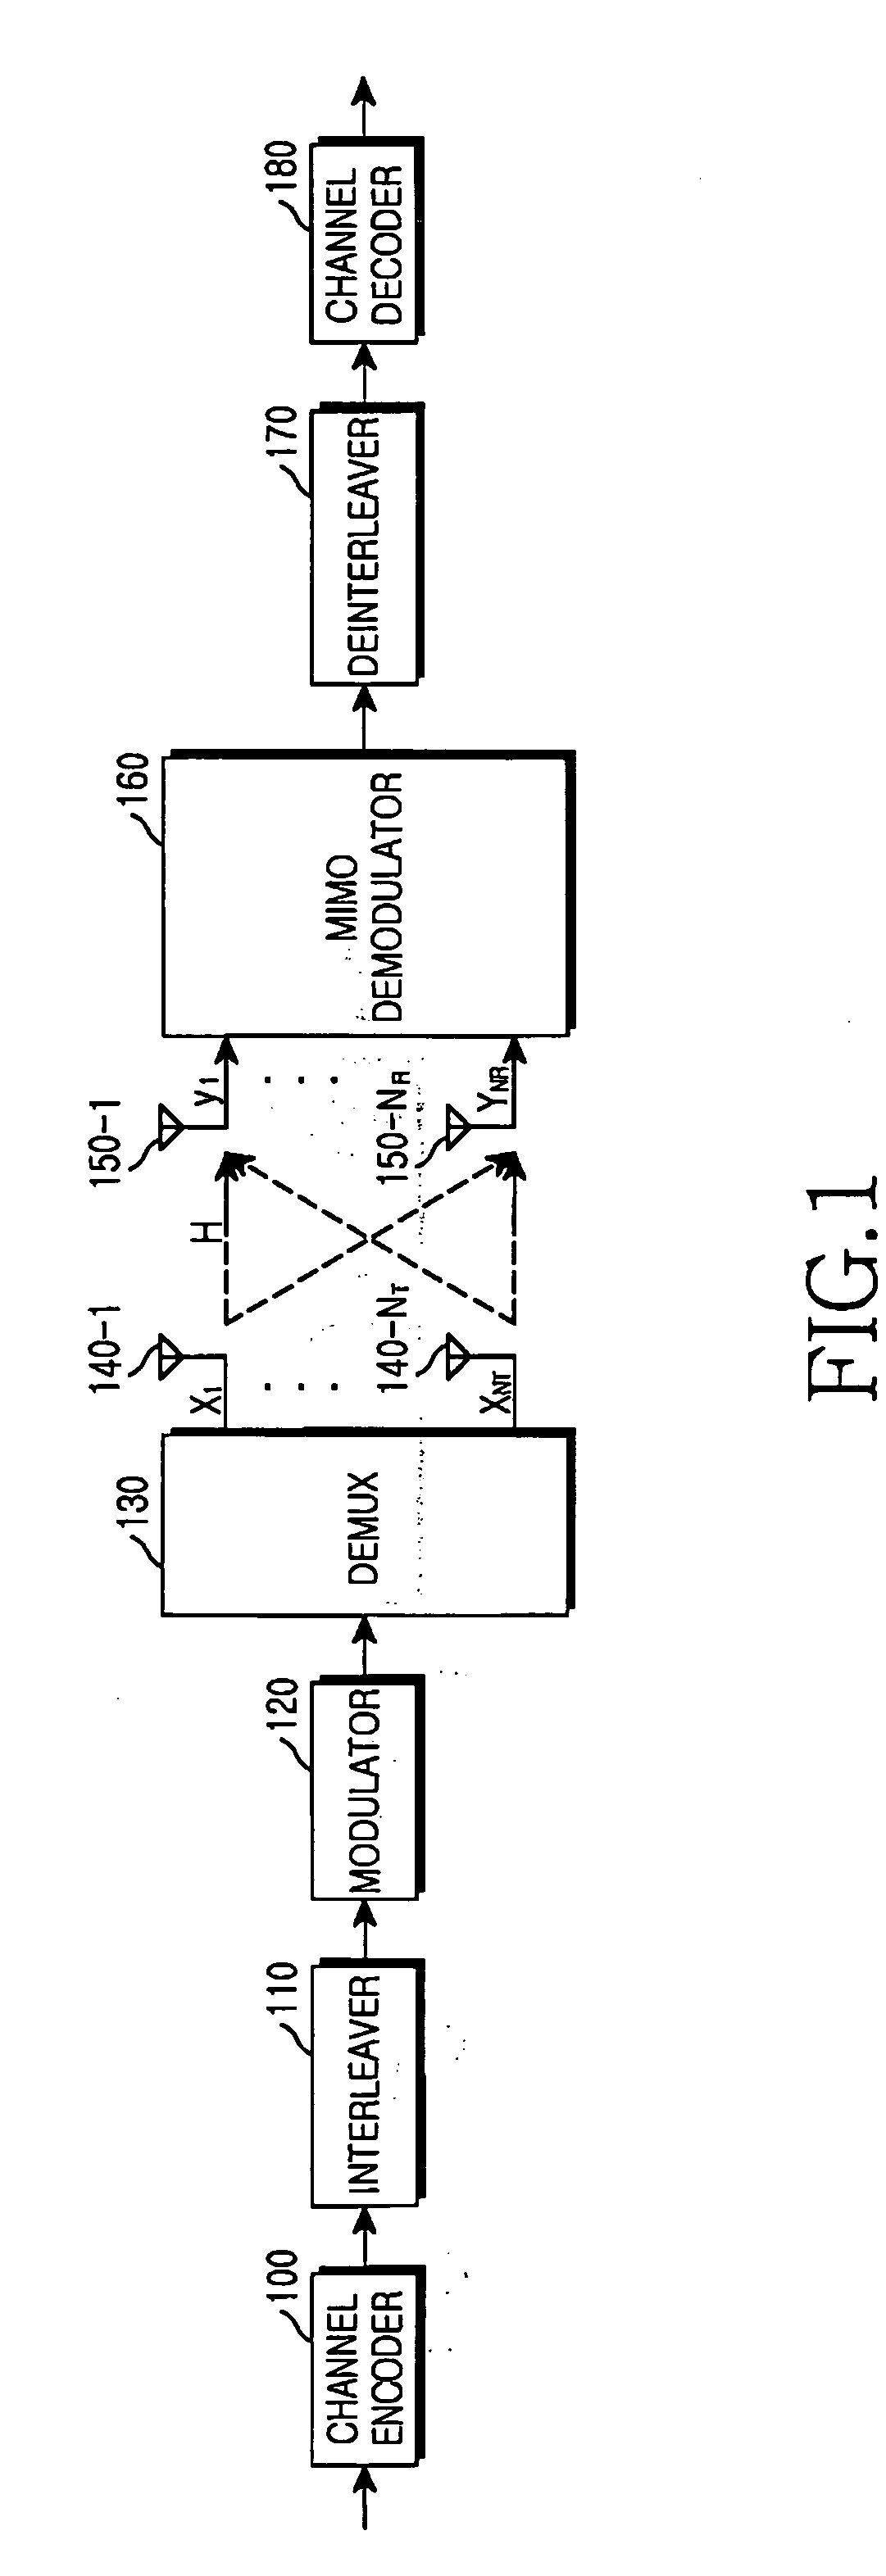 Log-likelihood ration (LLR) generating apparatus and method in MIMO antenna communication system